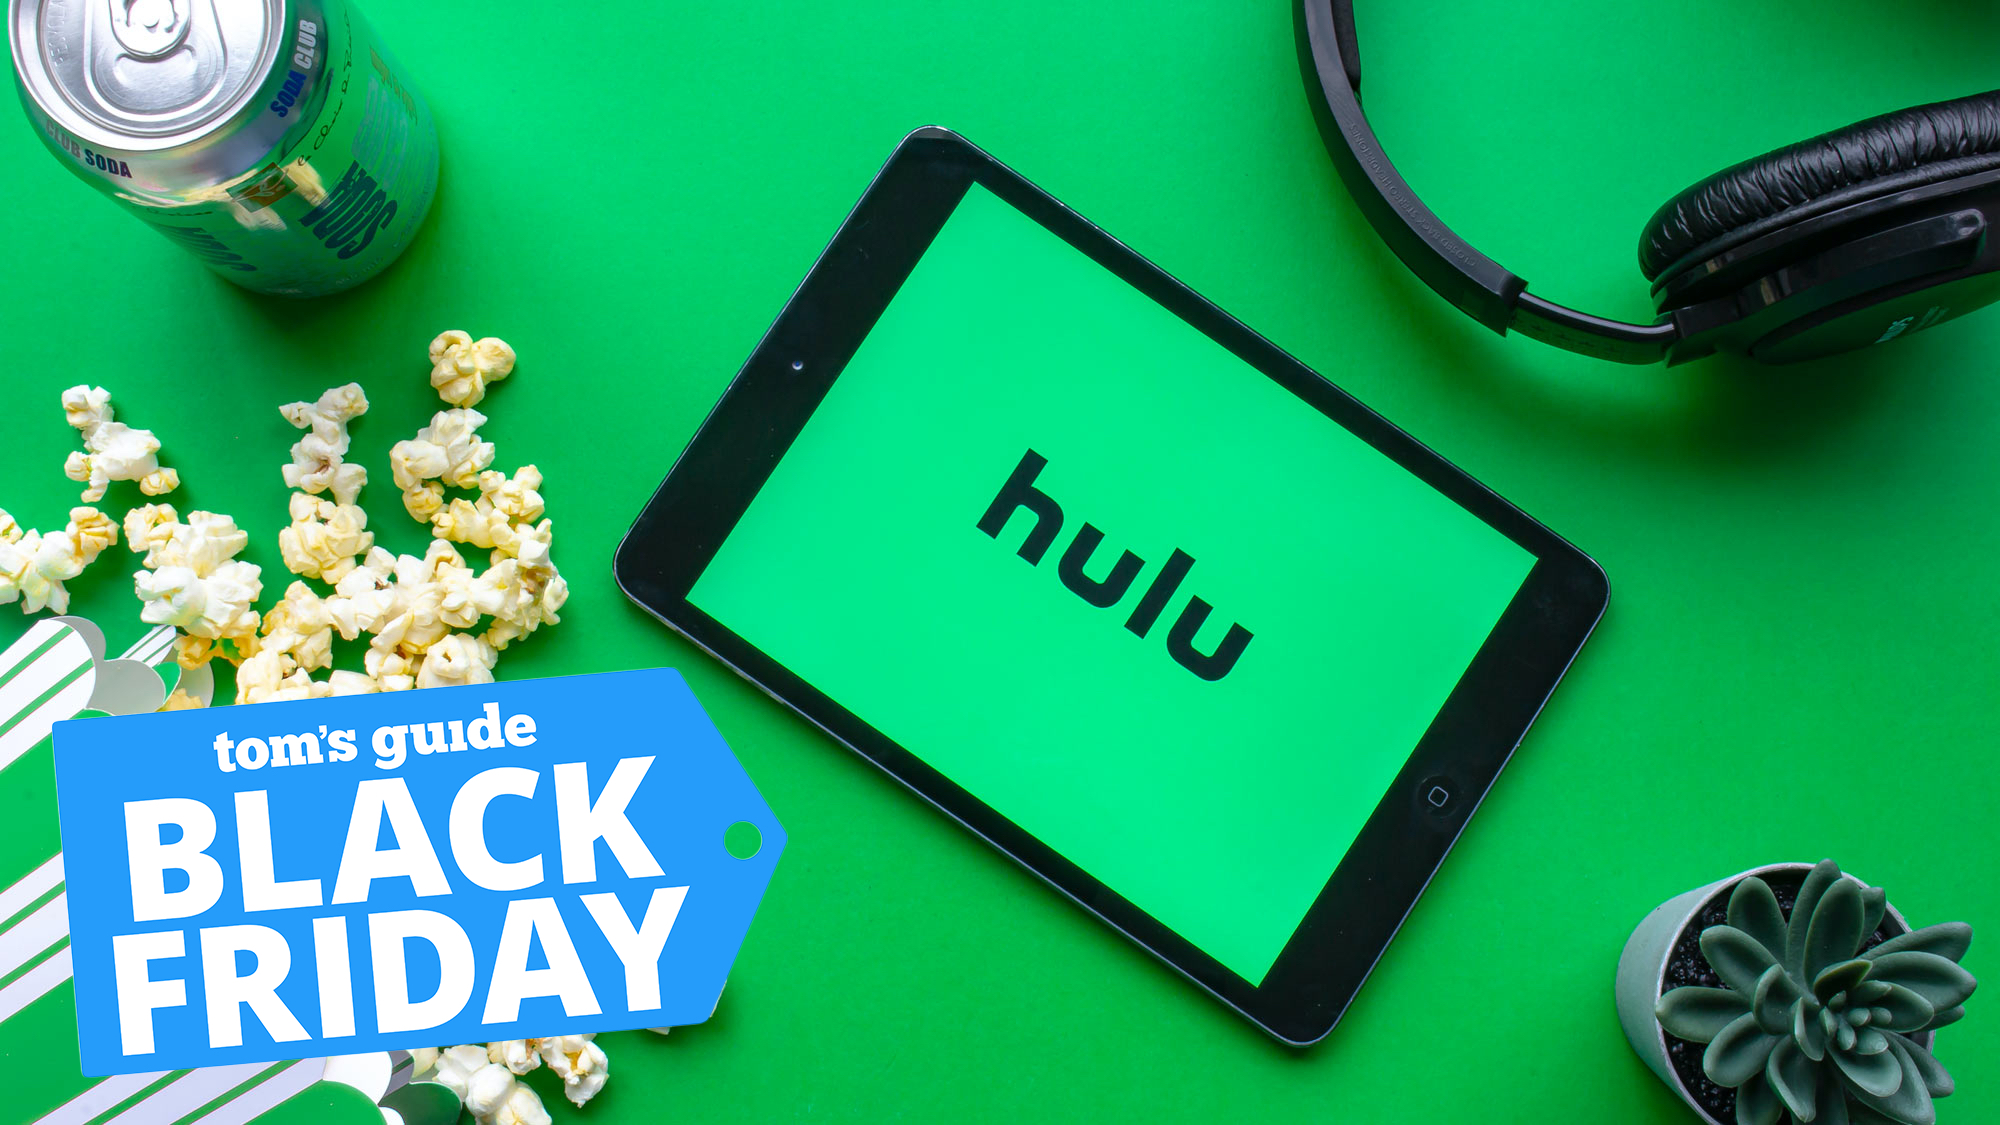 Hulu on tablet with Black Friday logo in corner